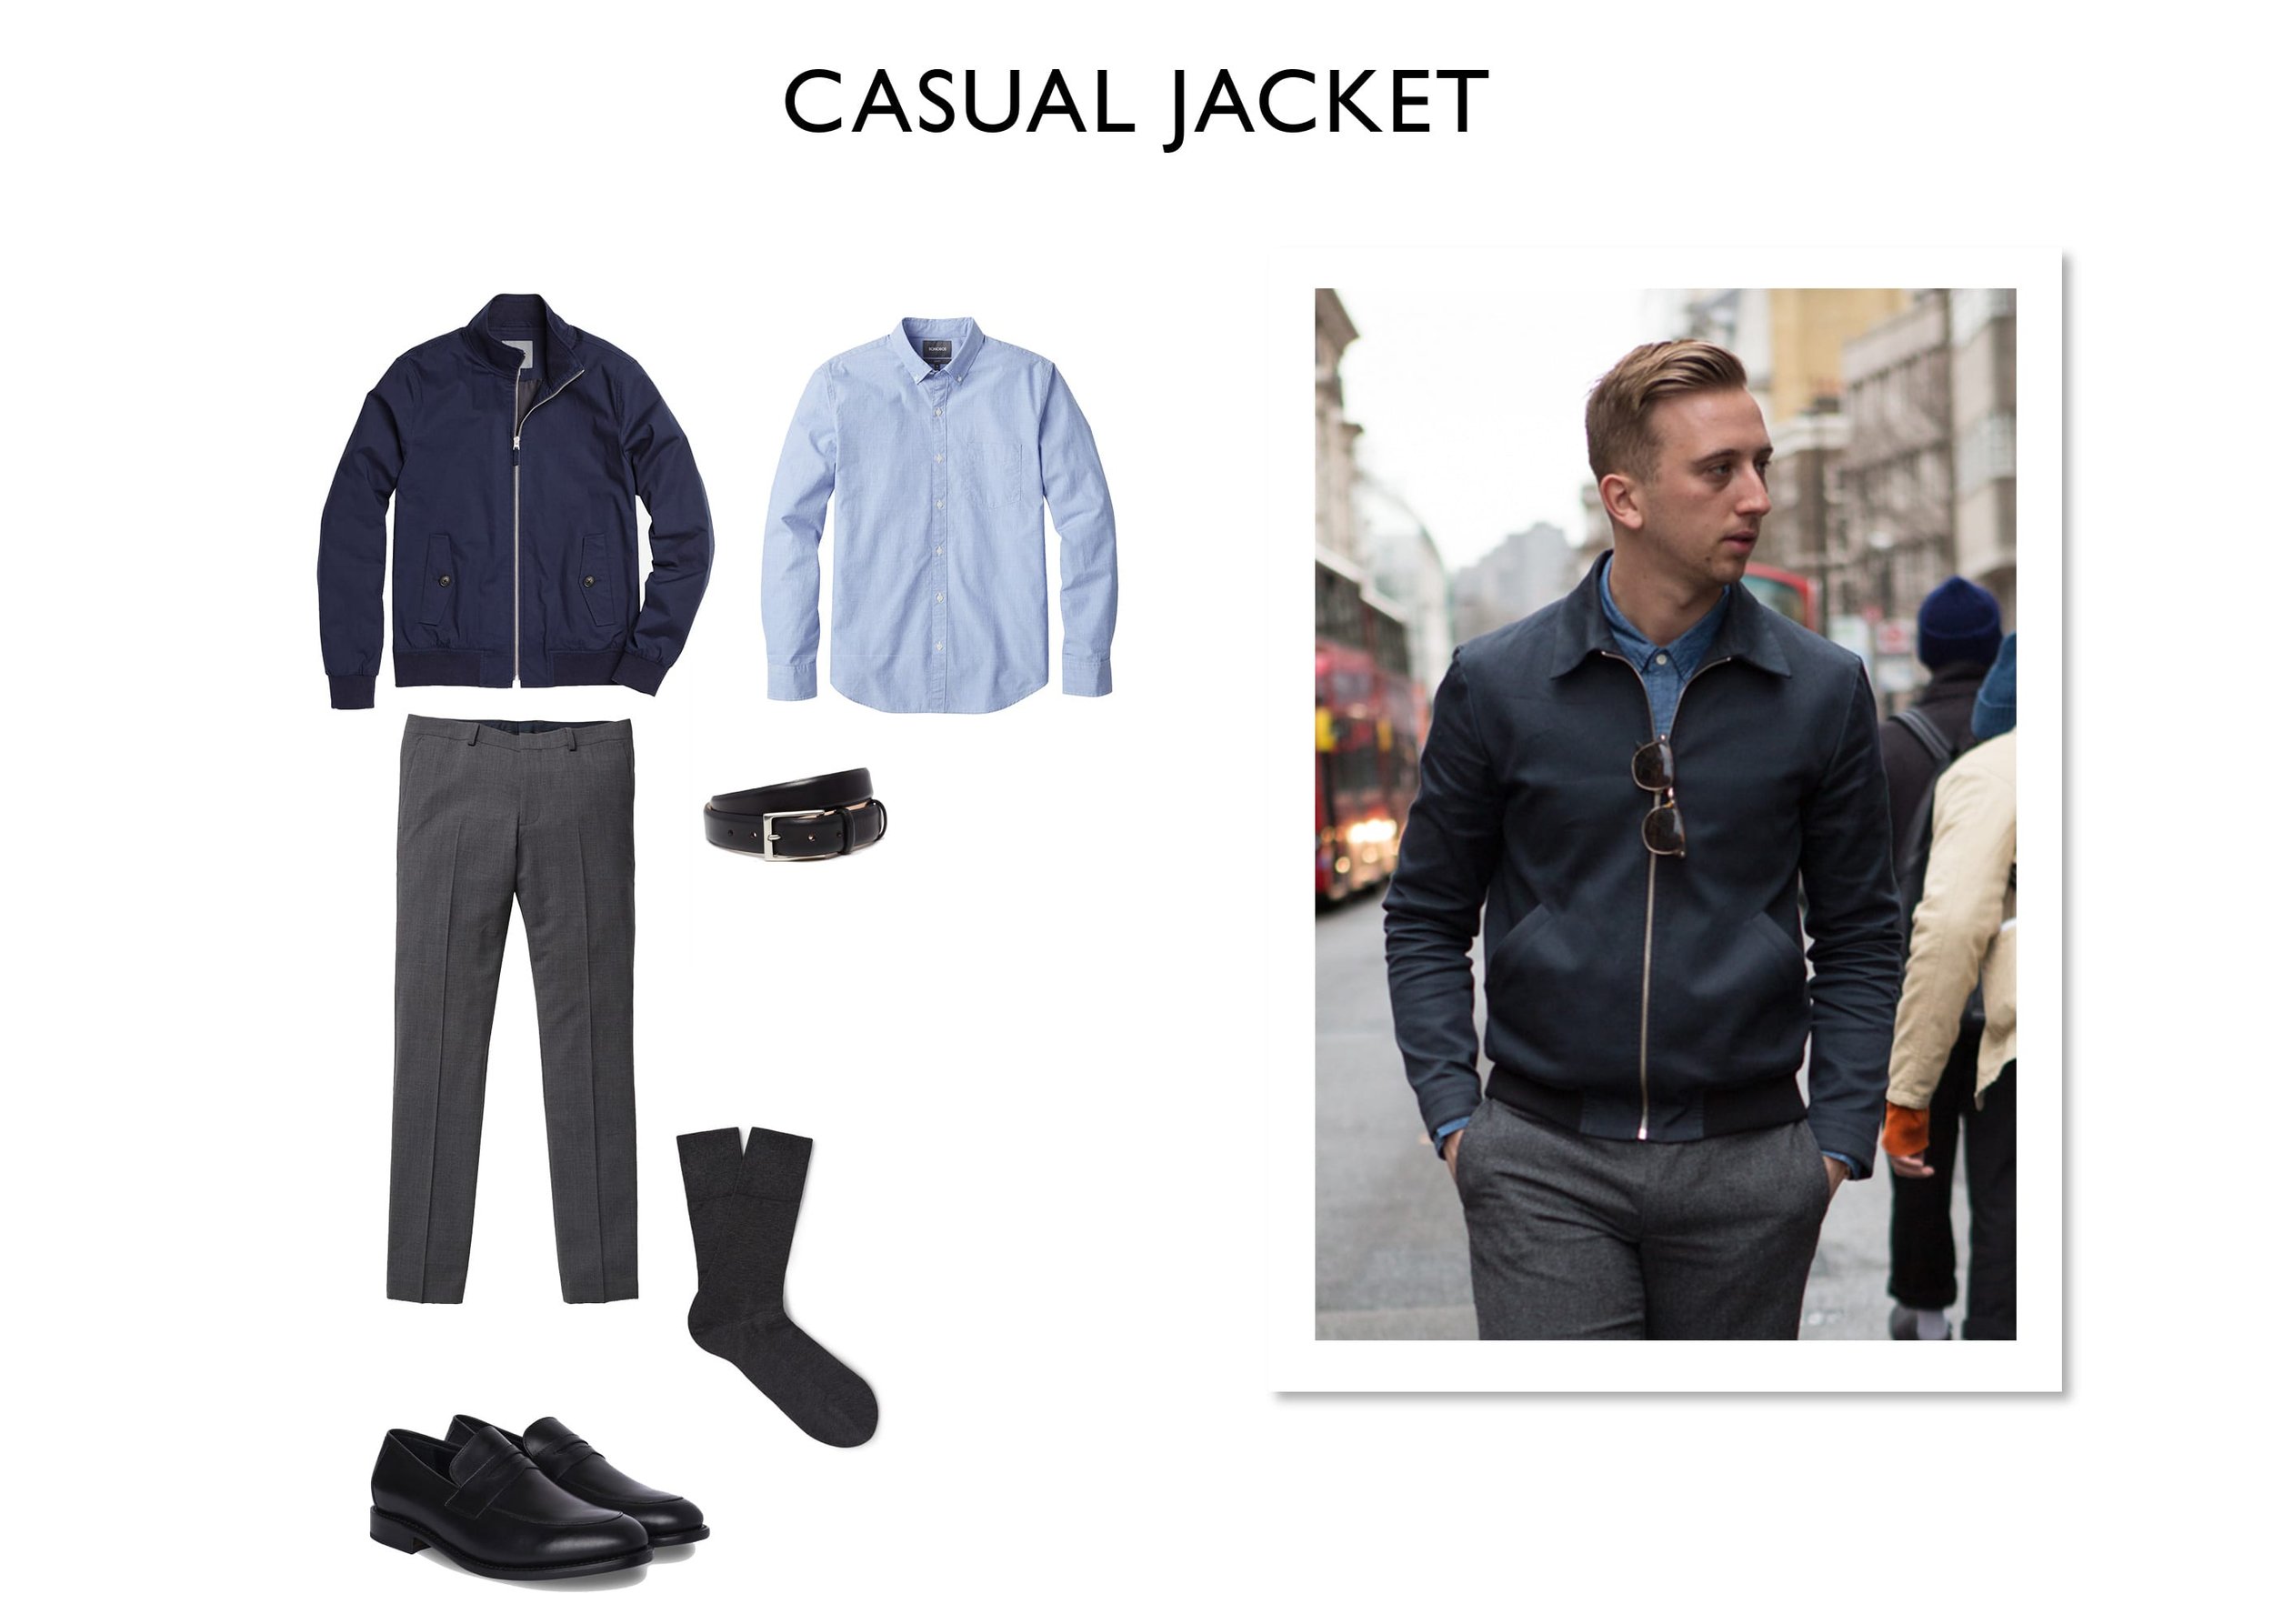 How to Transition Casual to Business Casual Clothing Options